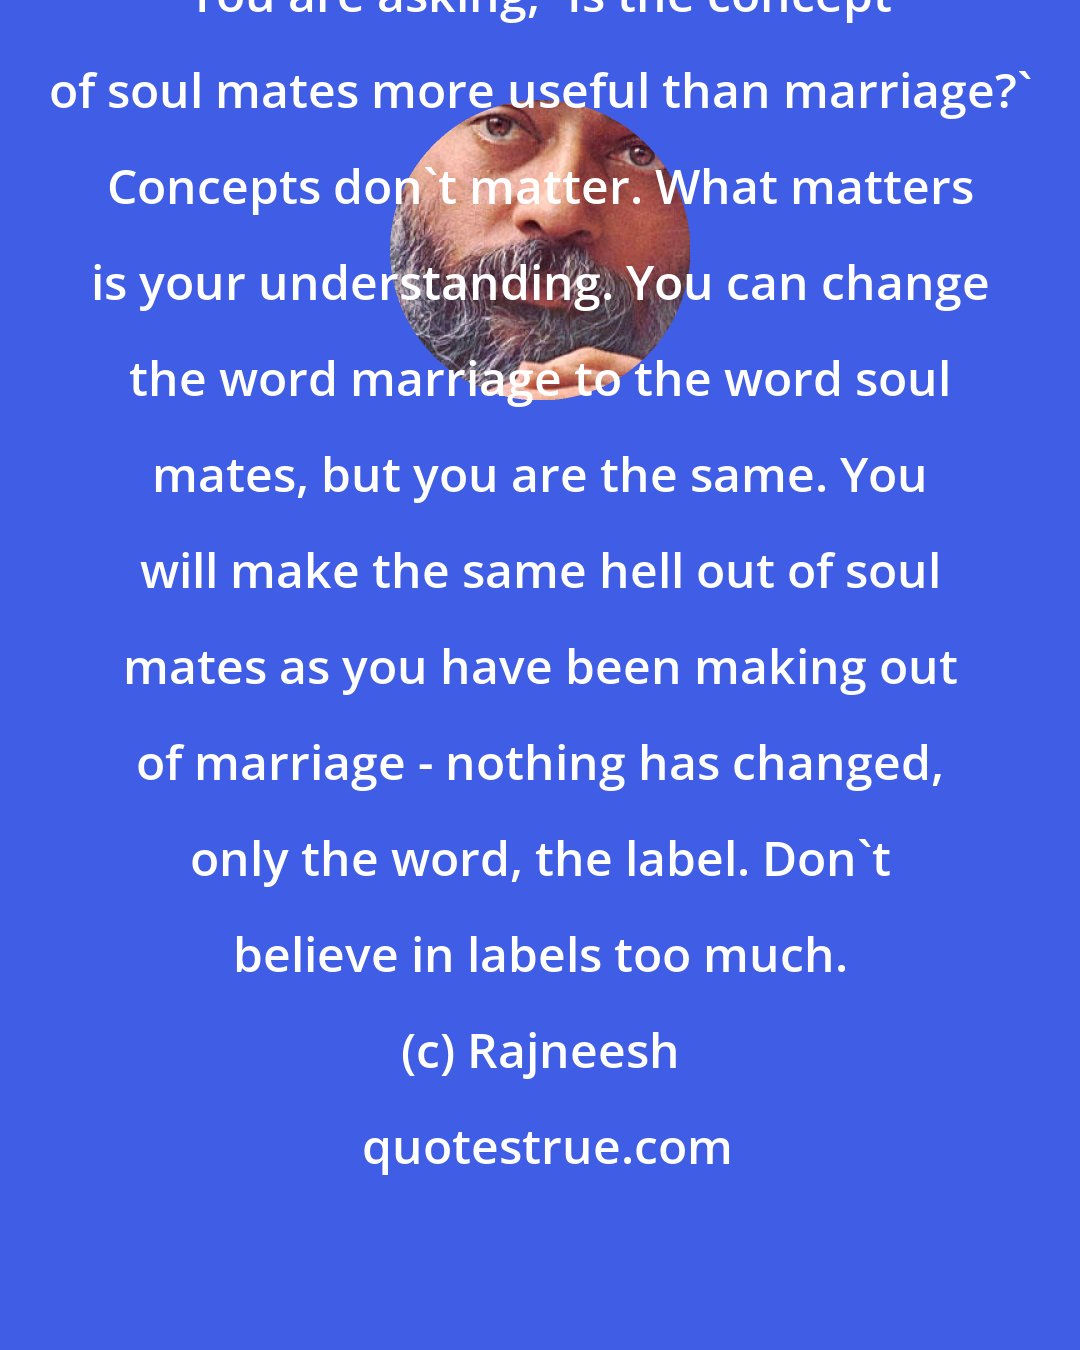 Rajneesh: You are asking, 'Is the concept of soul mates more useful than marriage?' Concepts don't matter. What matters is your understanding. You can change the word marriage to the word soul mates, but you are the same. You will make the same hell out of soul mates as you have been making out of marriage - nothing has changed, only the word, the label. Don't believe in labels too much.